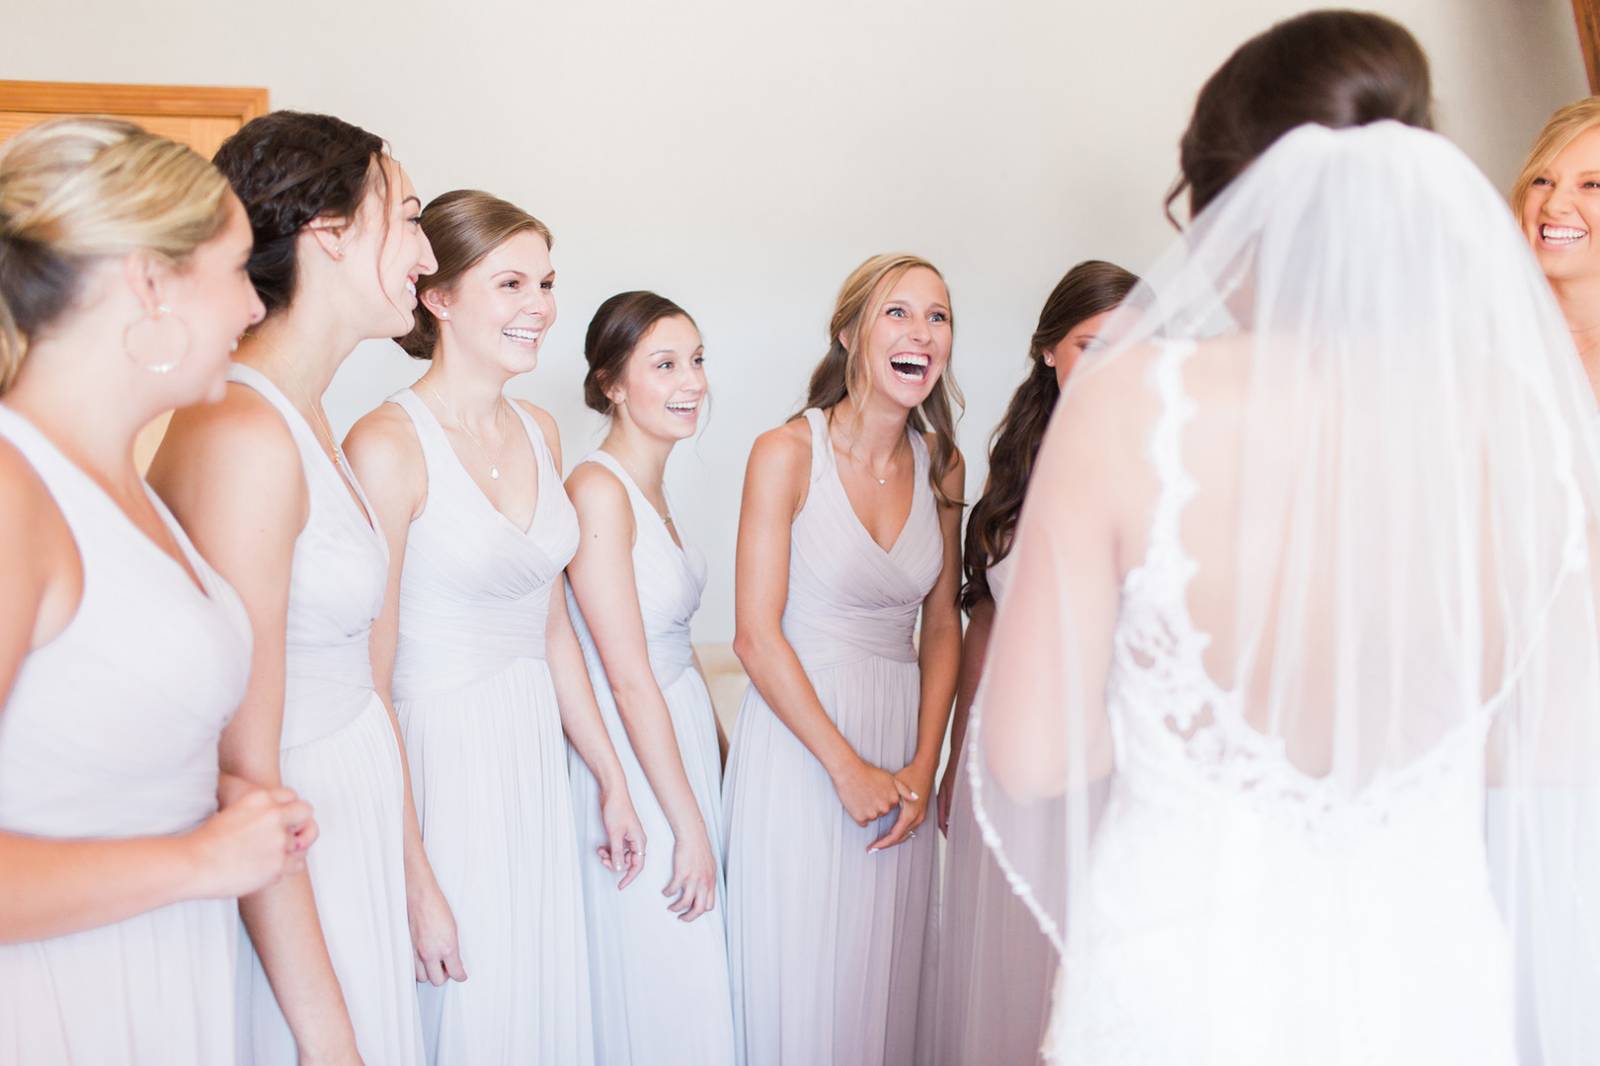 Neutral or nude colored bridesmaids dresses